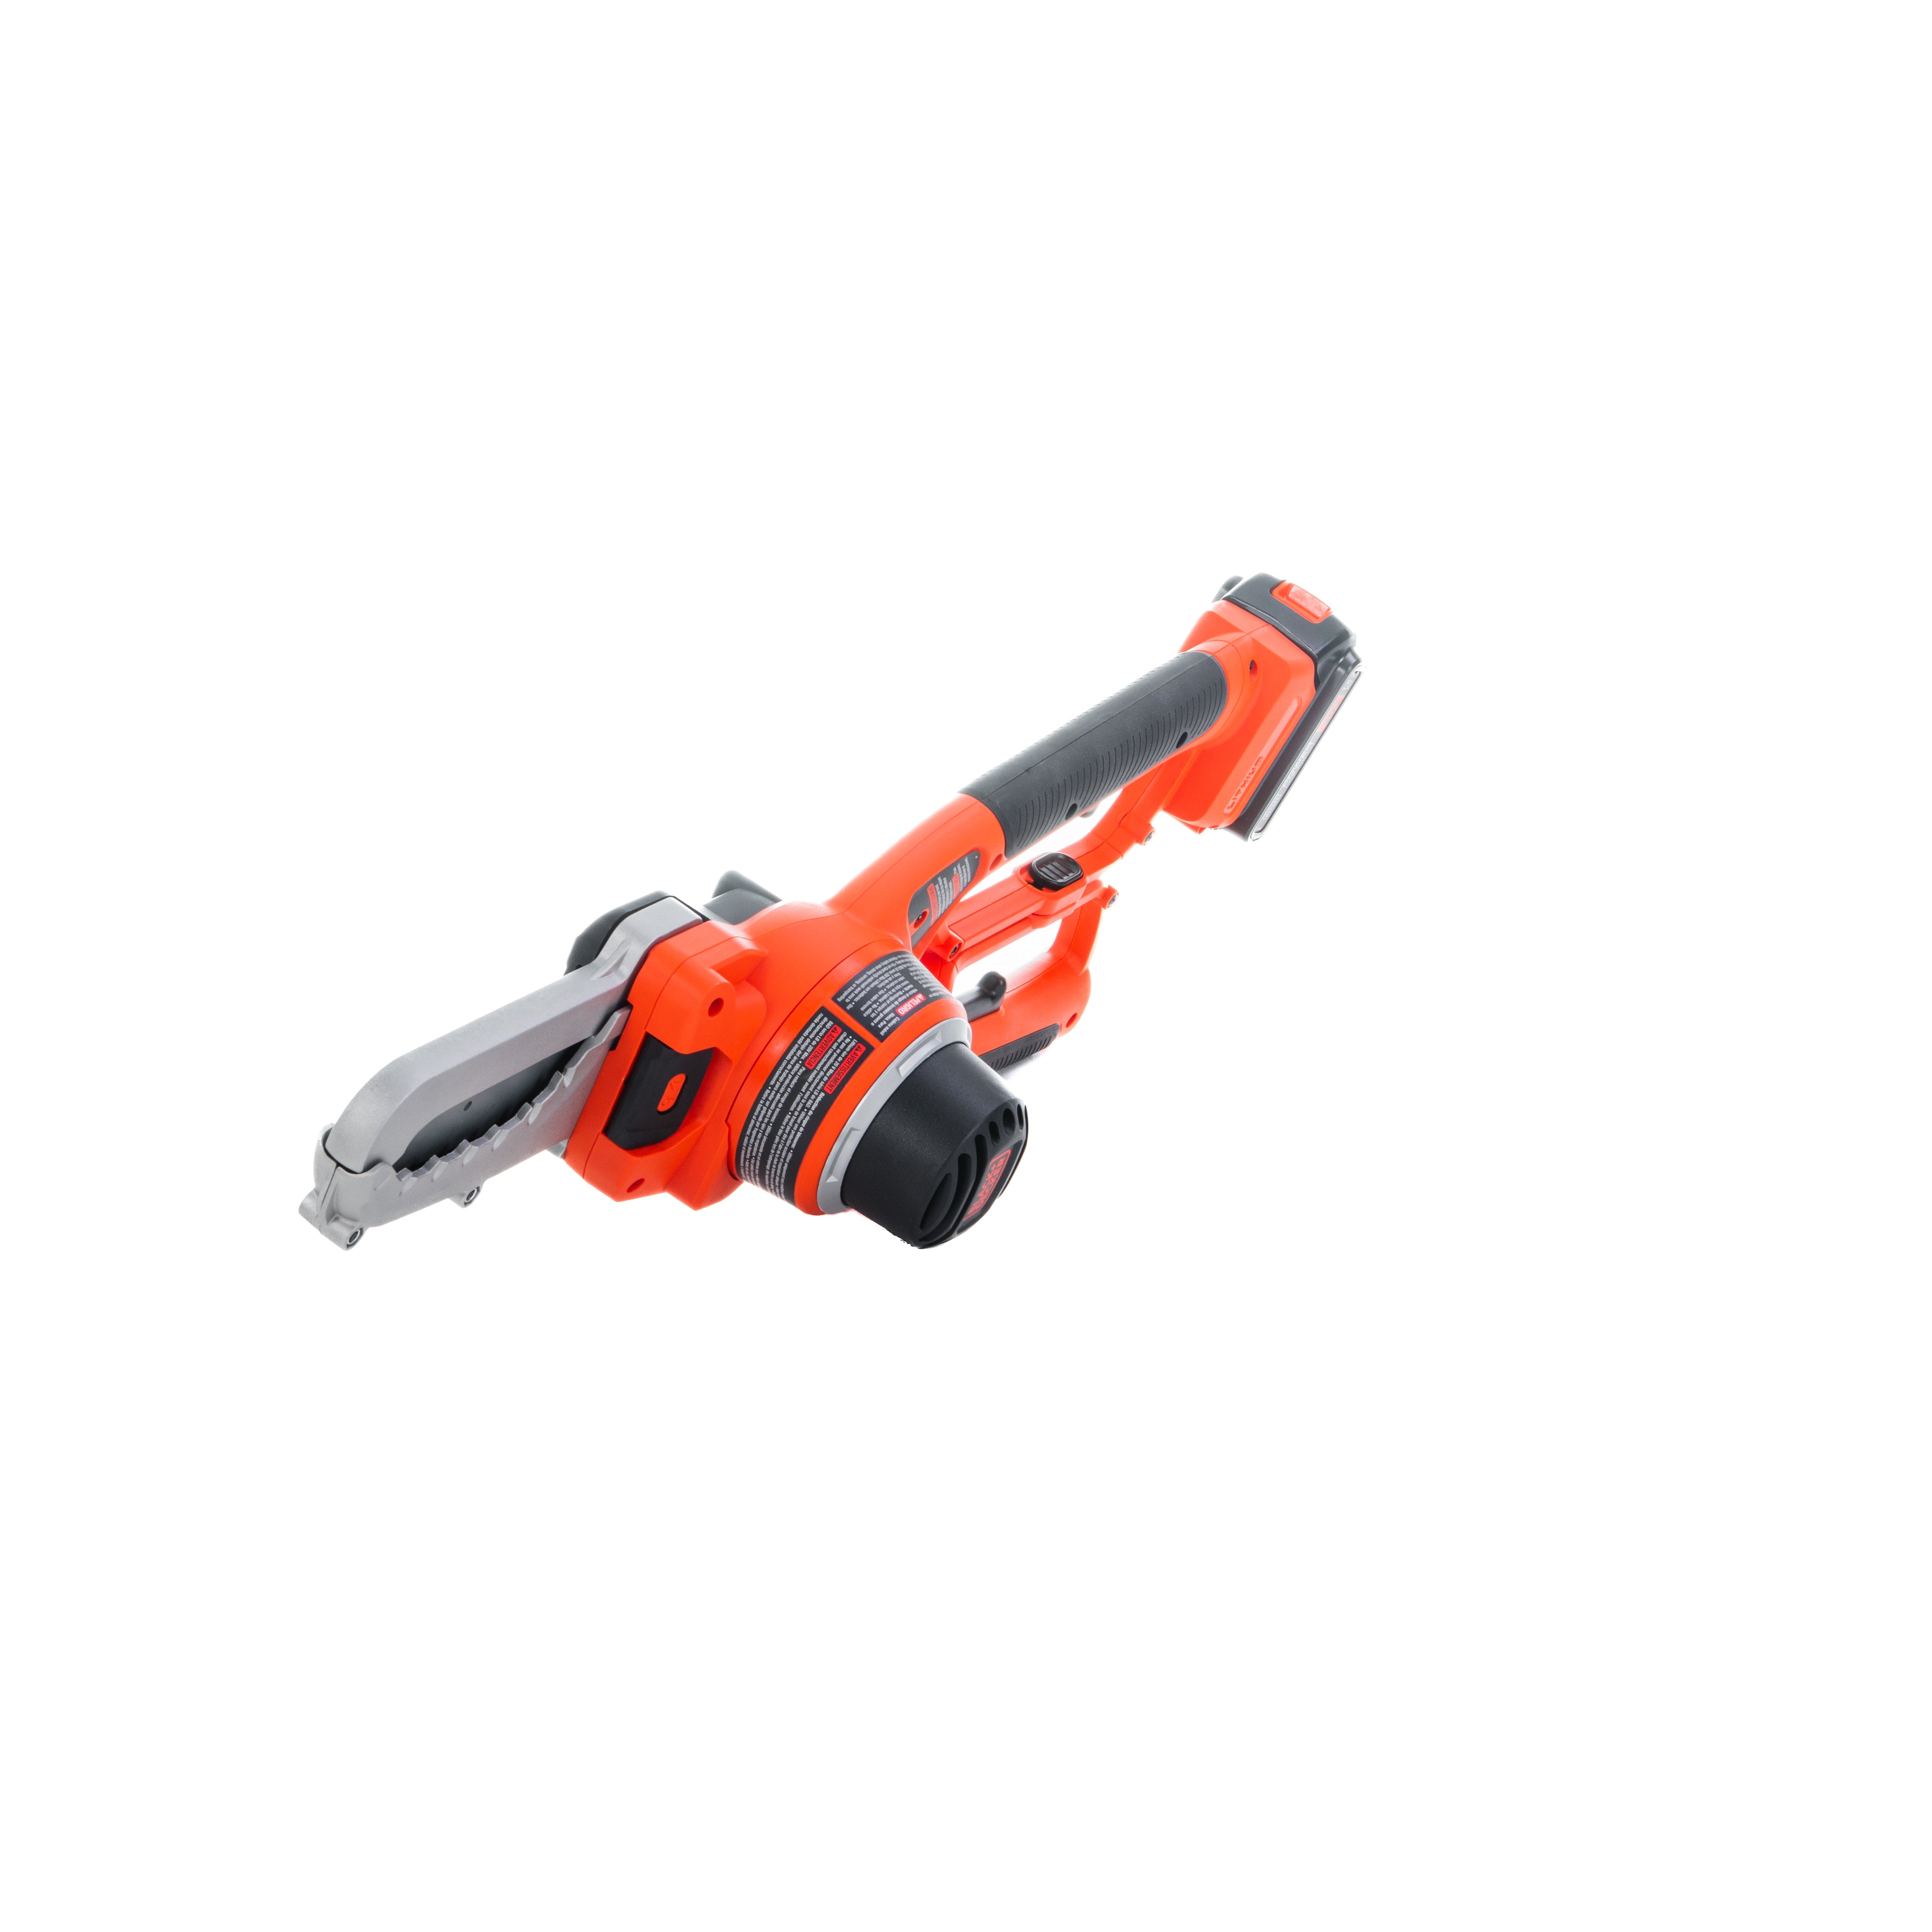 Black and Decker Alligator Lopper 6in 20V LLP120 from Black and